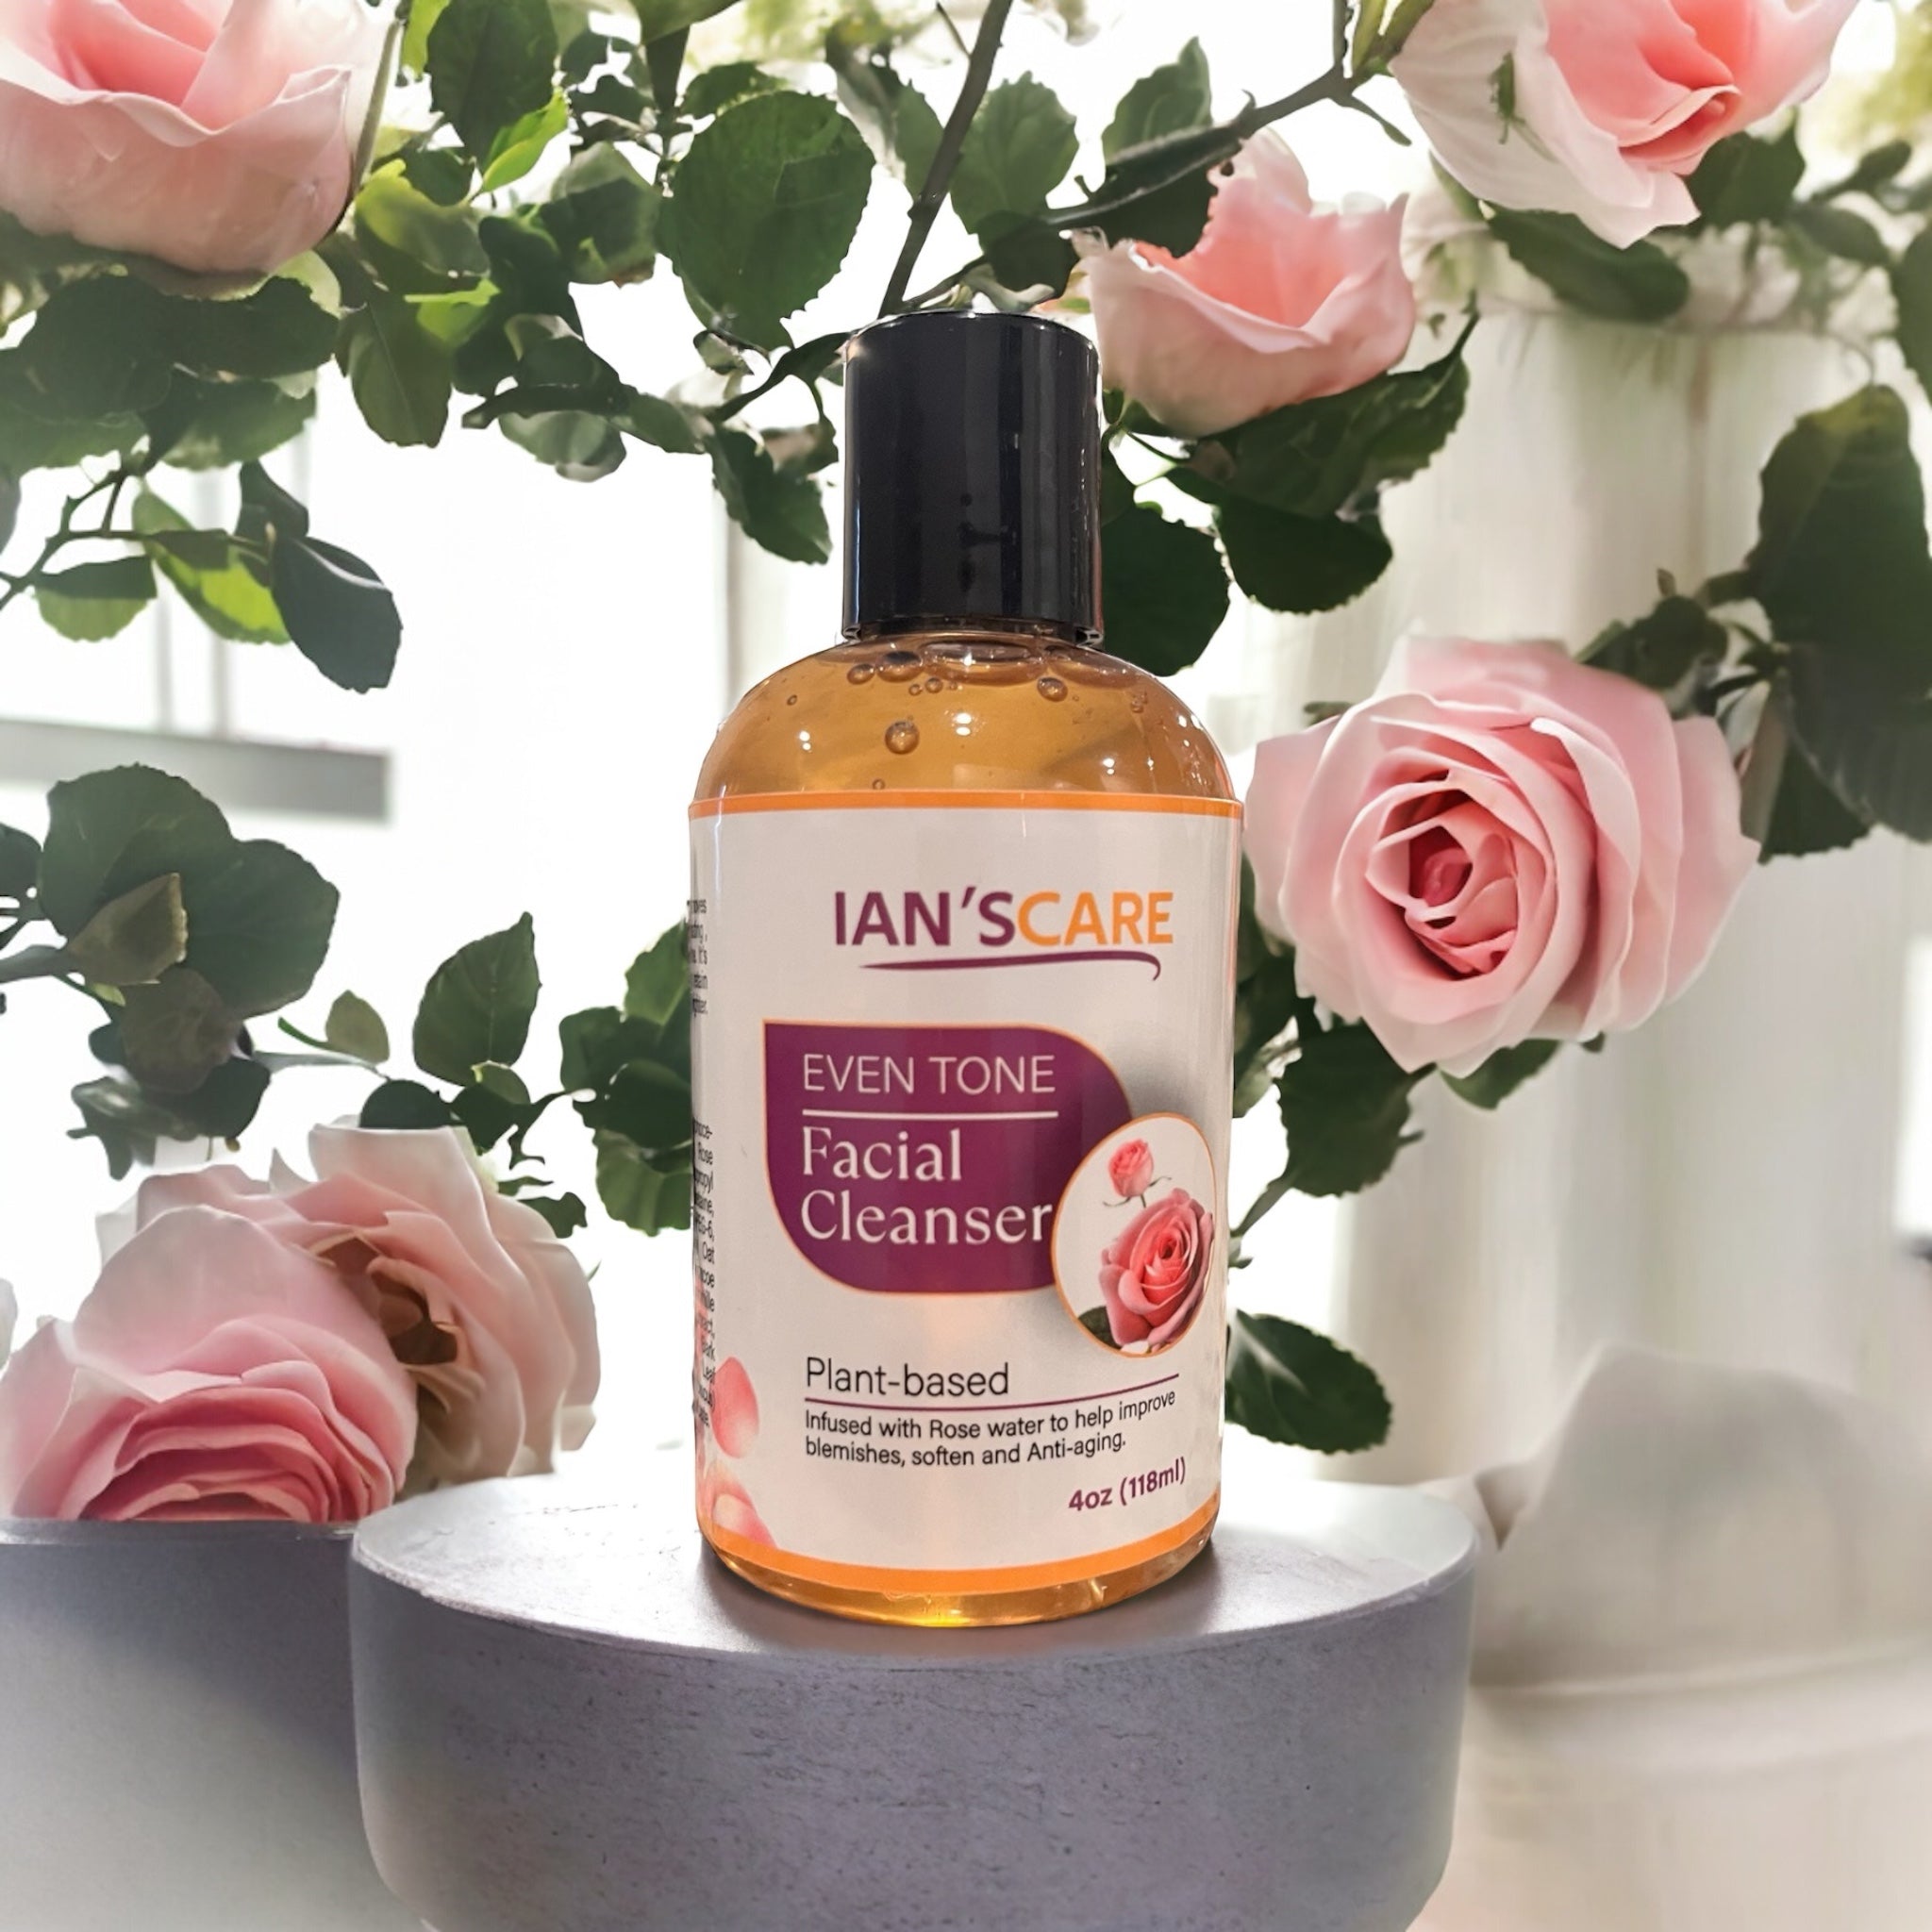 Even tone facial Cleanser infused with Rose water